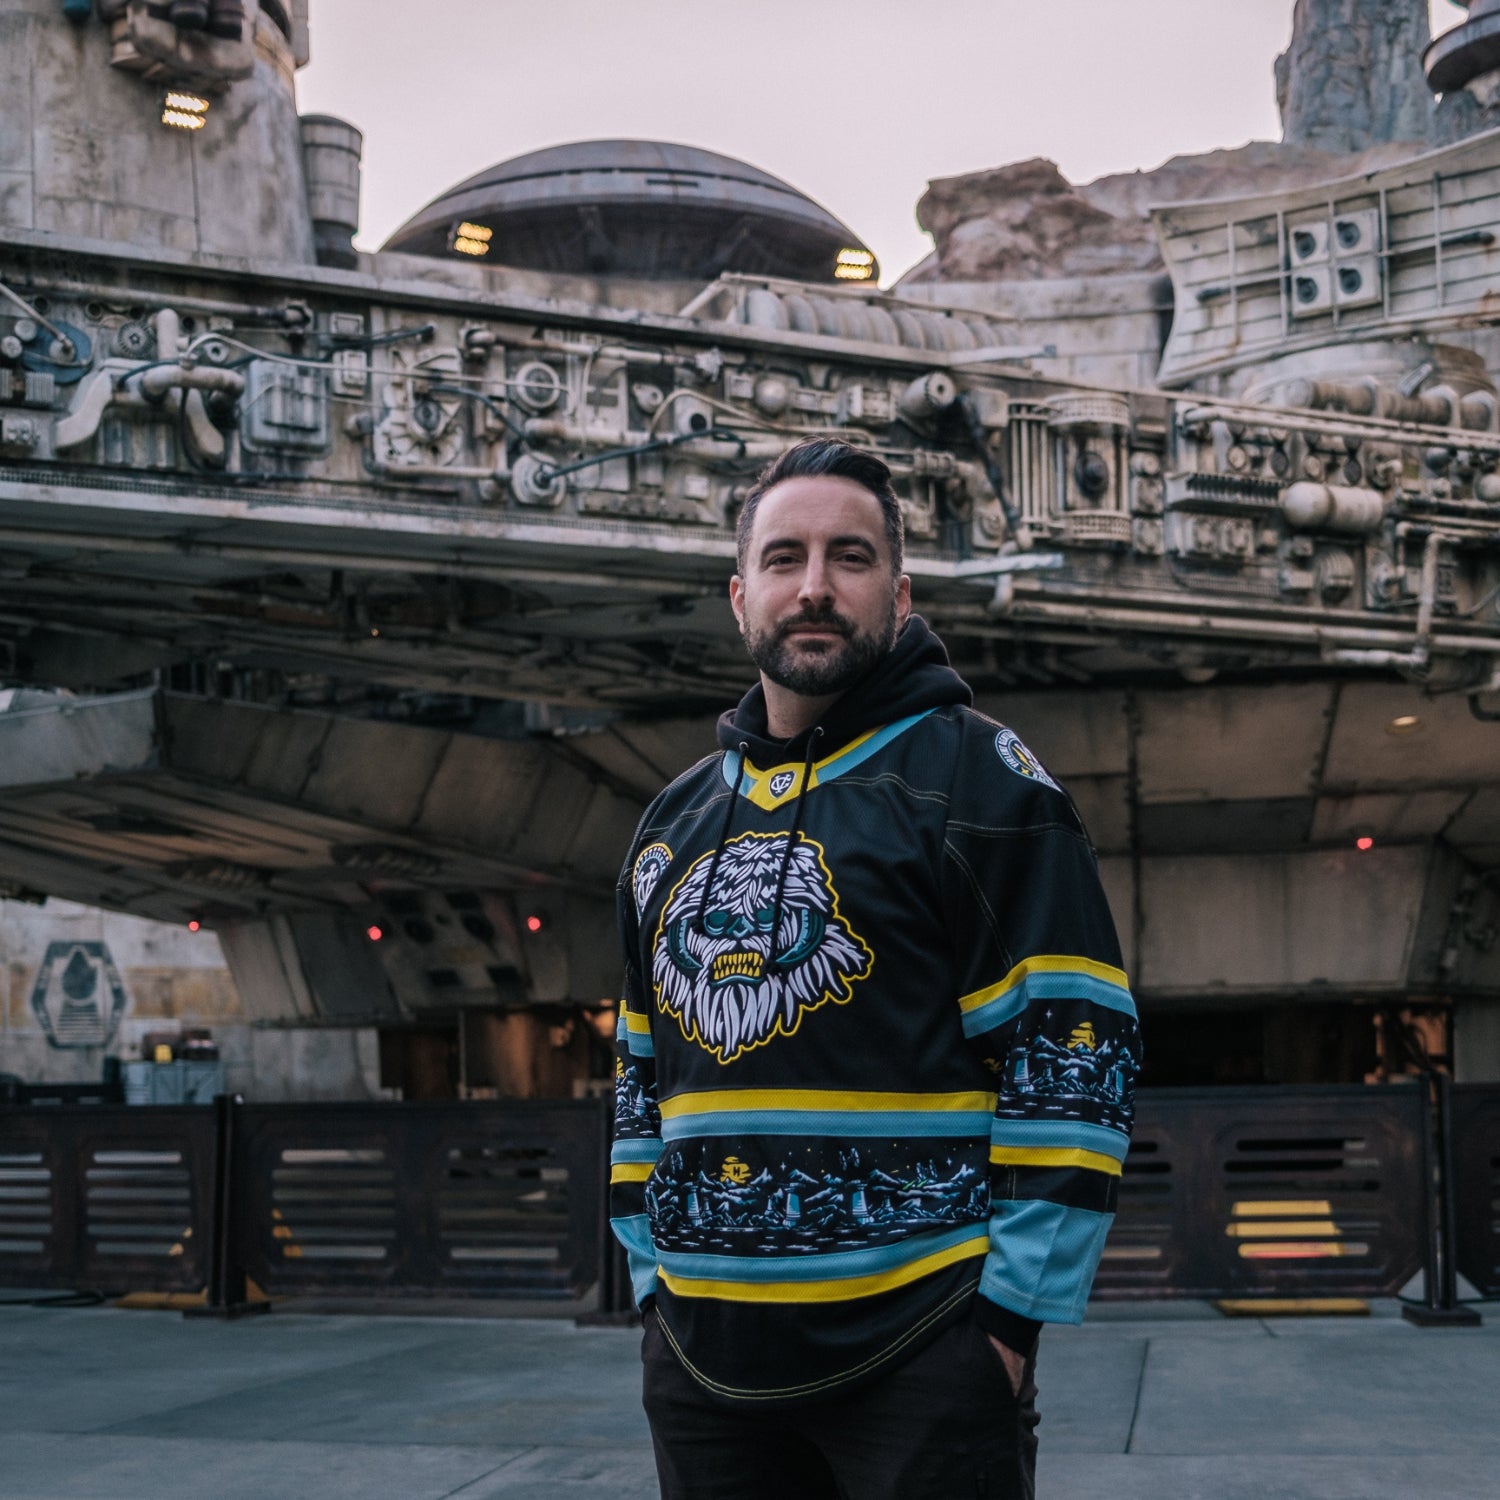 violent gentlemen hockey clothing company hockey club new star wars may the 4th releases - new Hoth hockey jersey, Hoth Star Wars Wampa t-shirt, tee, hoodie, and hockey socks. Learn more by checking out Lifetipsforbetterliving Hockey Apparel